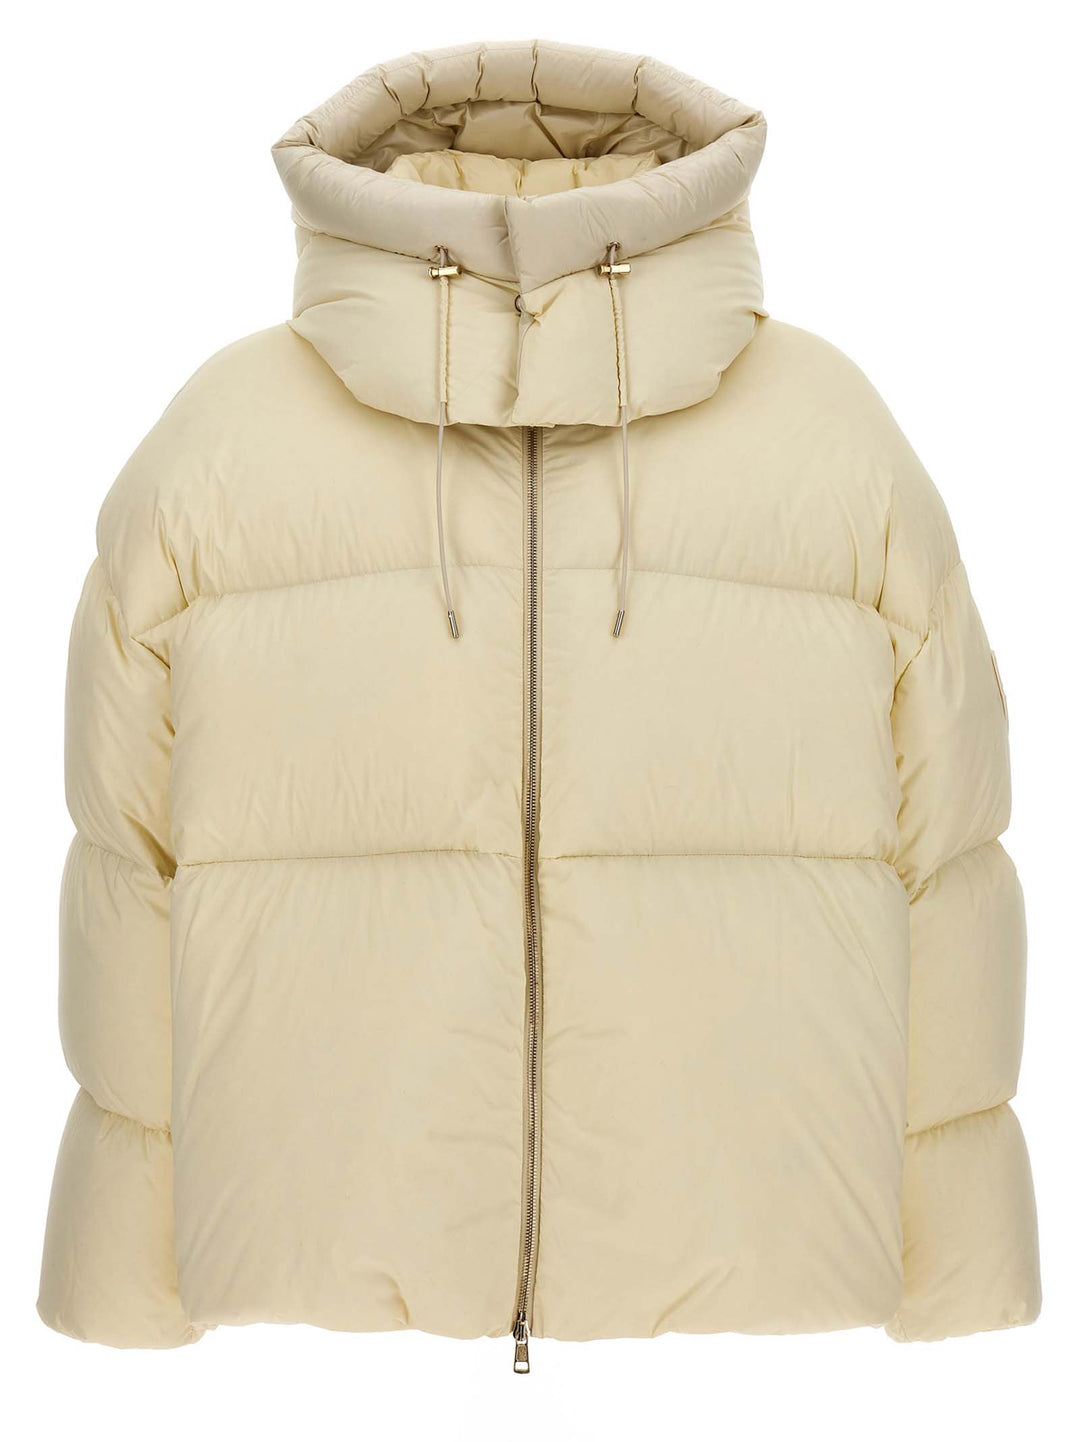 Moncler Genius Roc Nation By Jay-Z Down Jacket Giacche Bianco